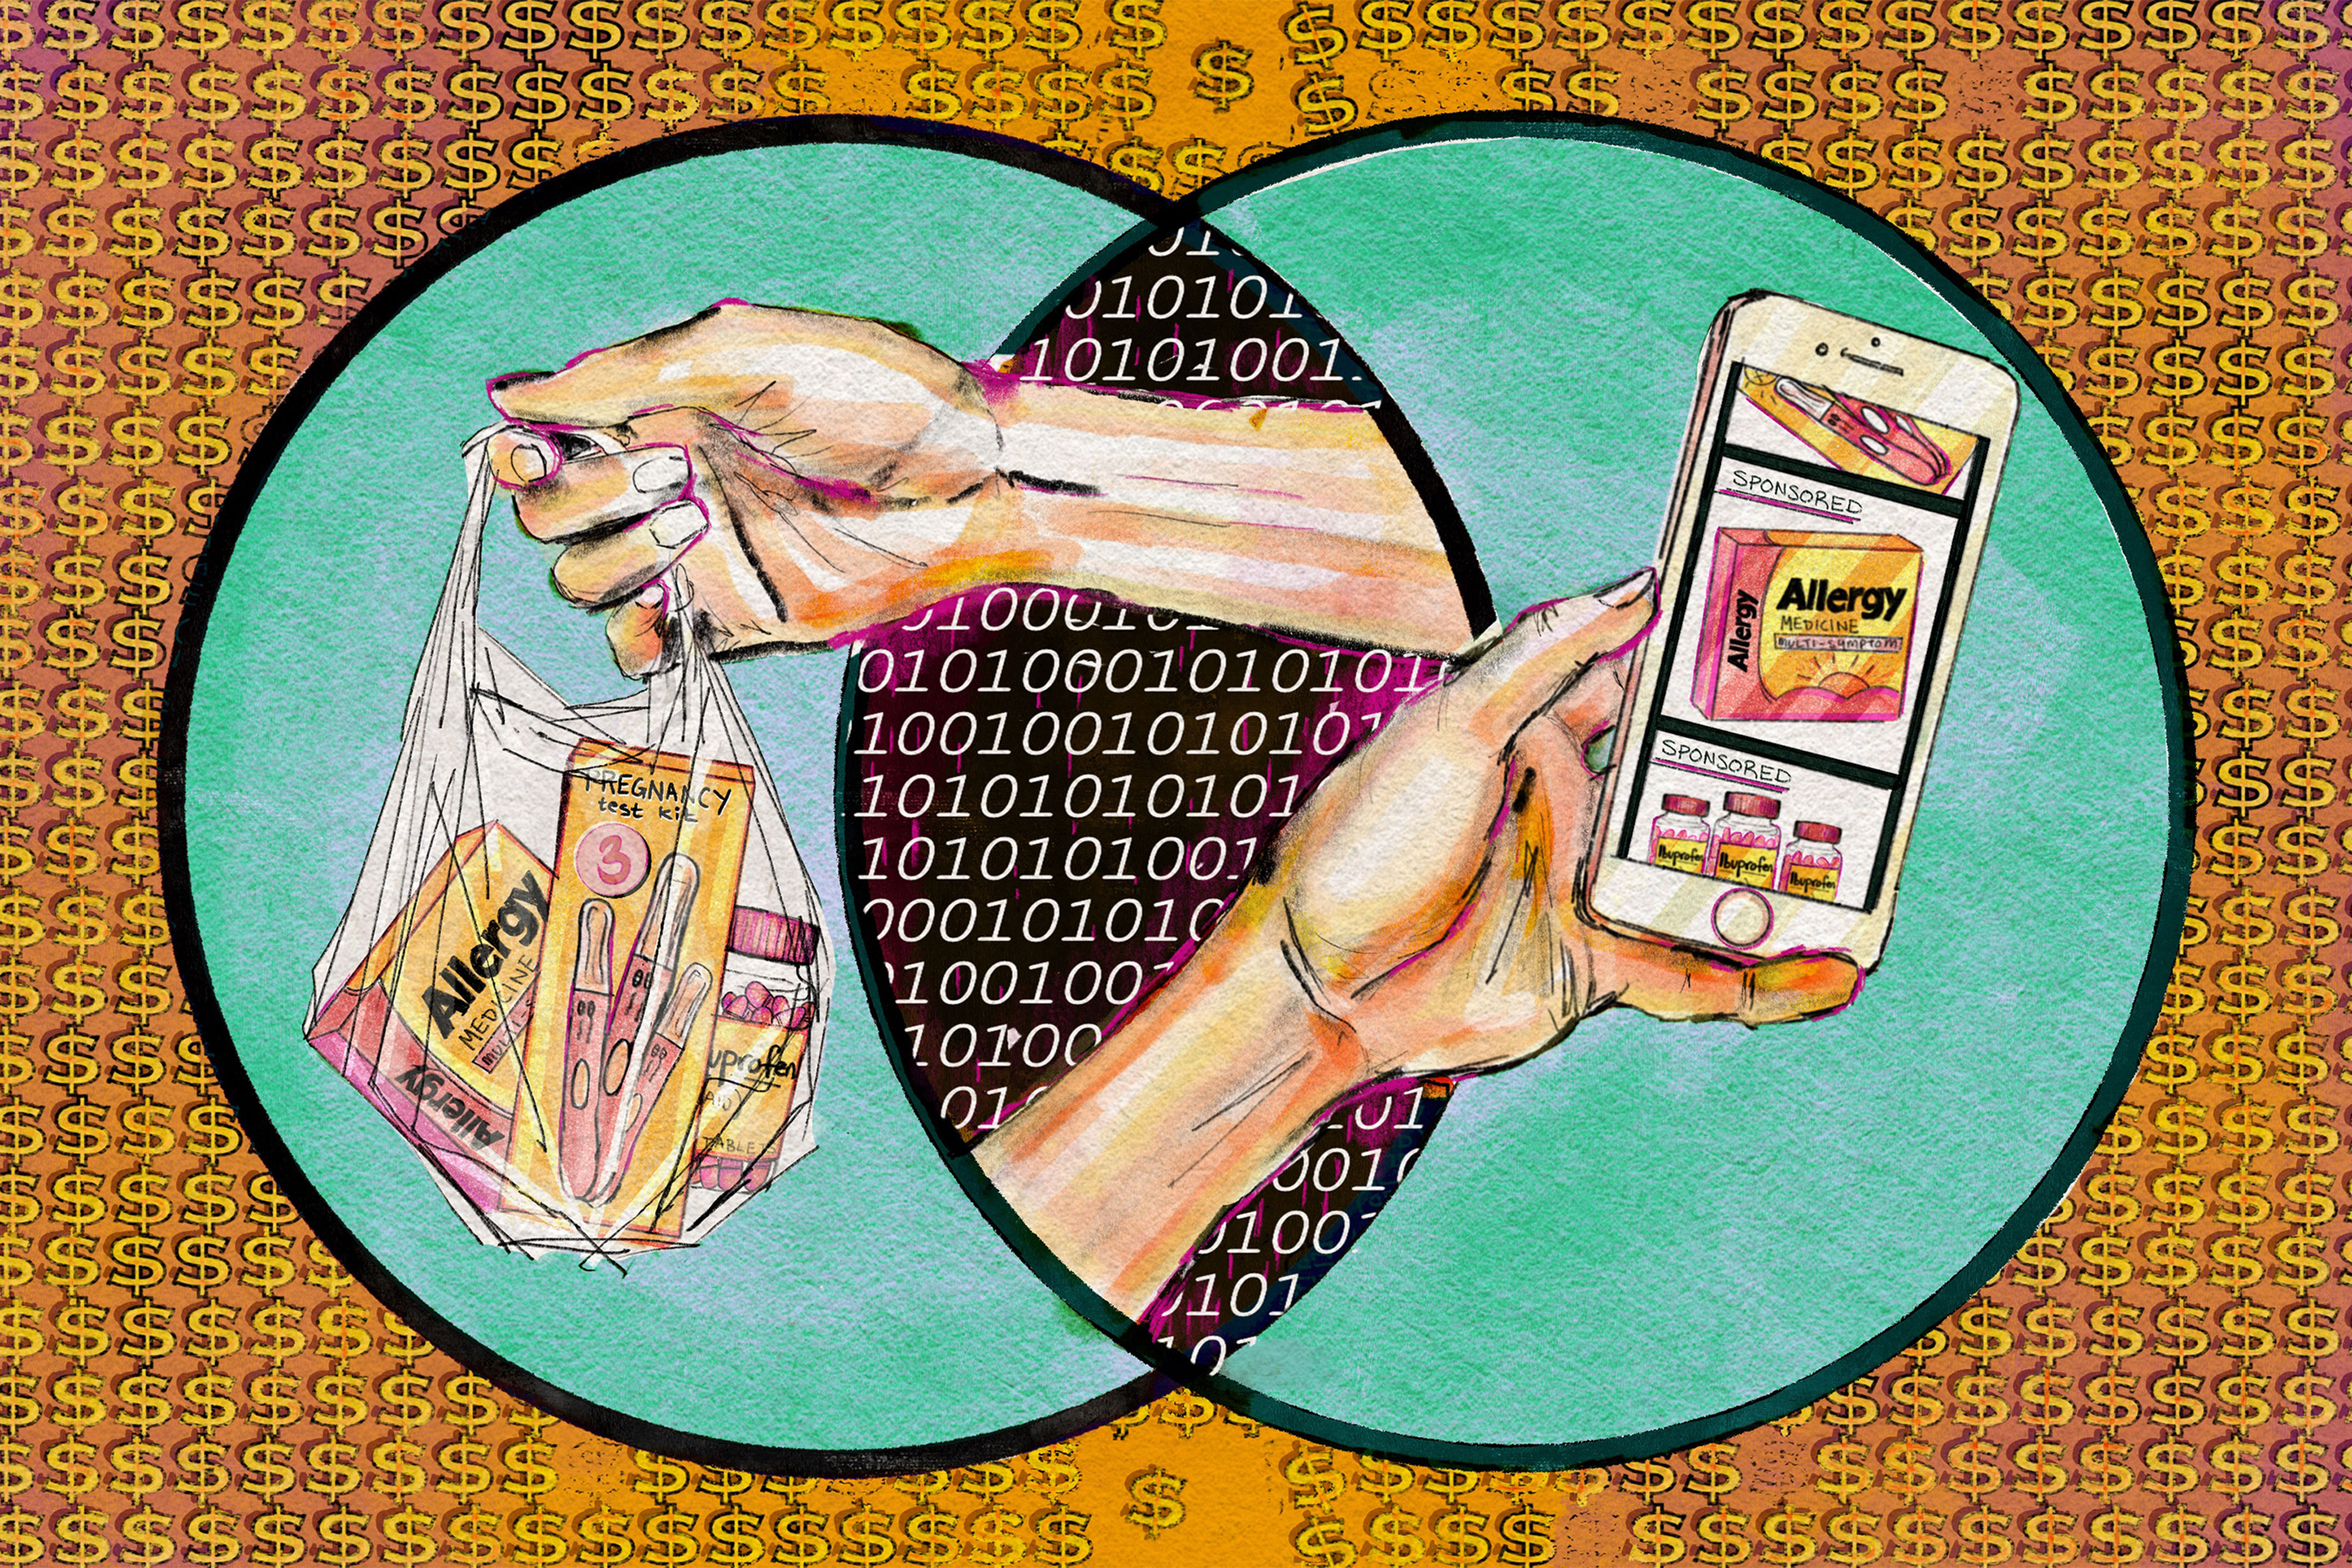 A digital illustration in bright copic marker and pencil shows a repetitive dollar-sign motif with two solid circles overlapping in the center of the image. Where they overlap, there is a binary-code pattern of zeroes and 1s, which represents information shared digitally. Two hands reach out of the digital space. The hand on the left holds a bag of over-the-counter products. The hand on the right holds a smartphone with an app open, showing sponsored advertisements for the same products in the bag to the left.